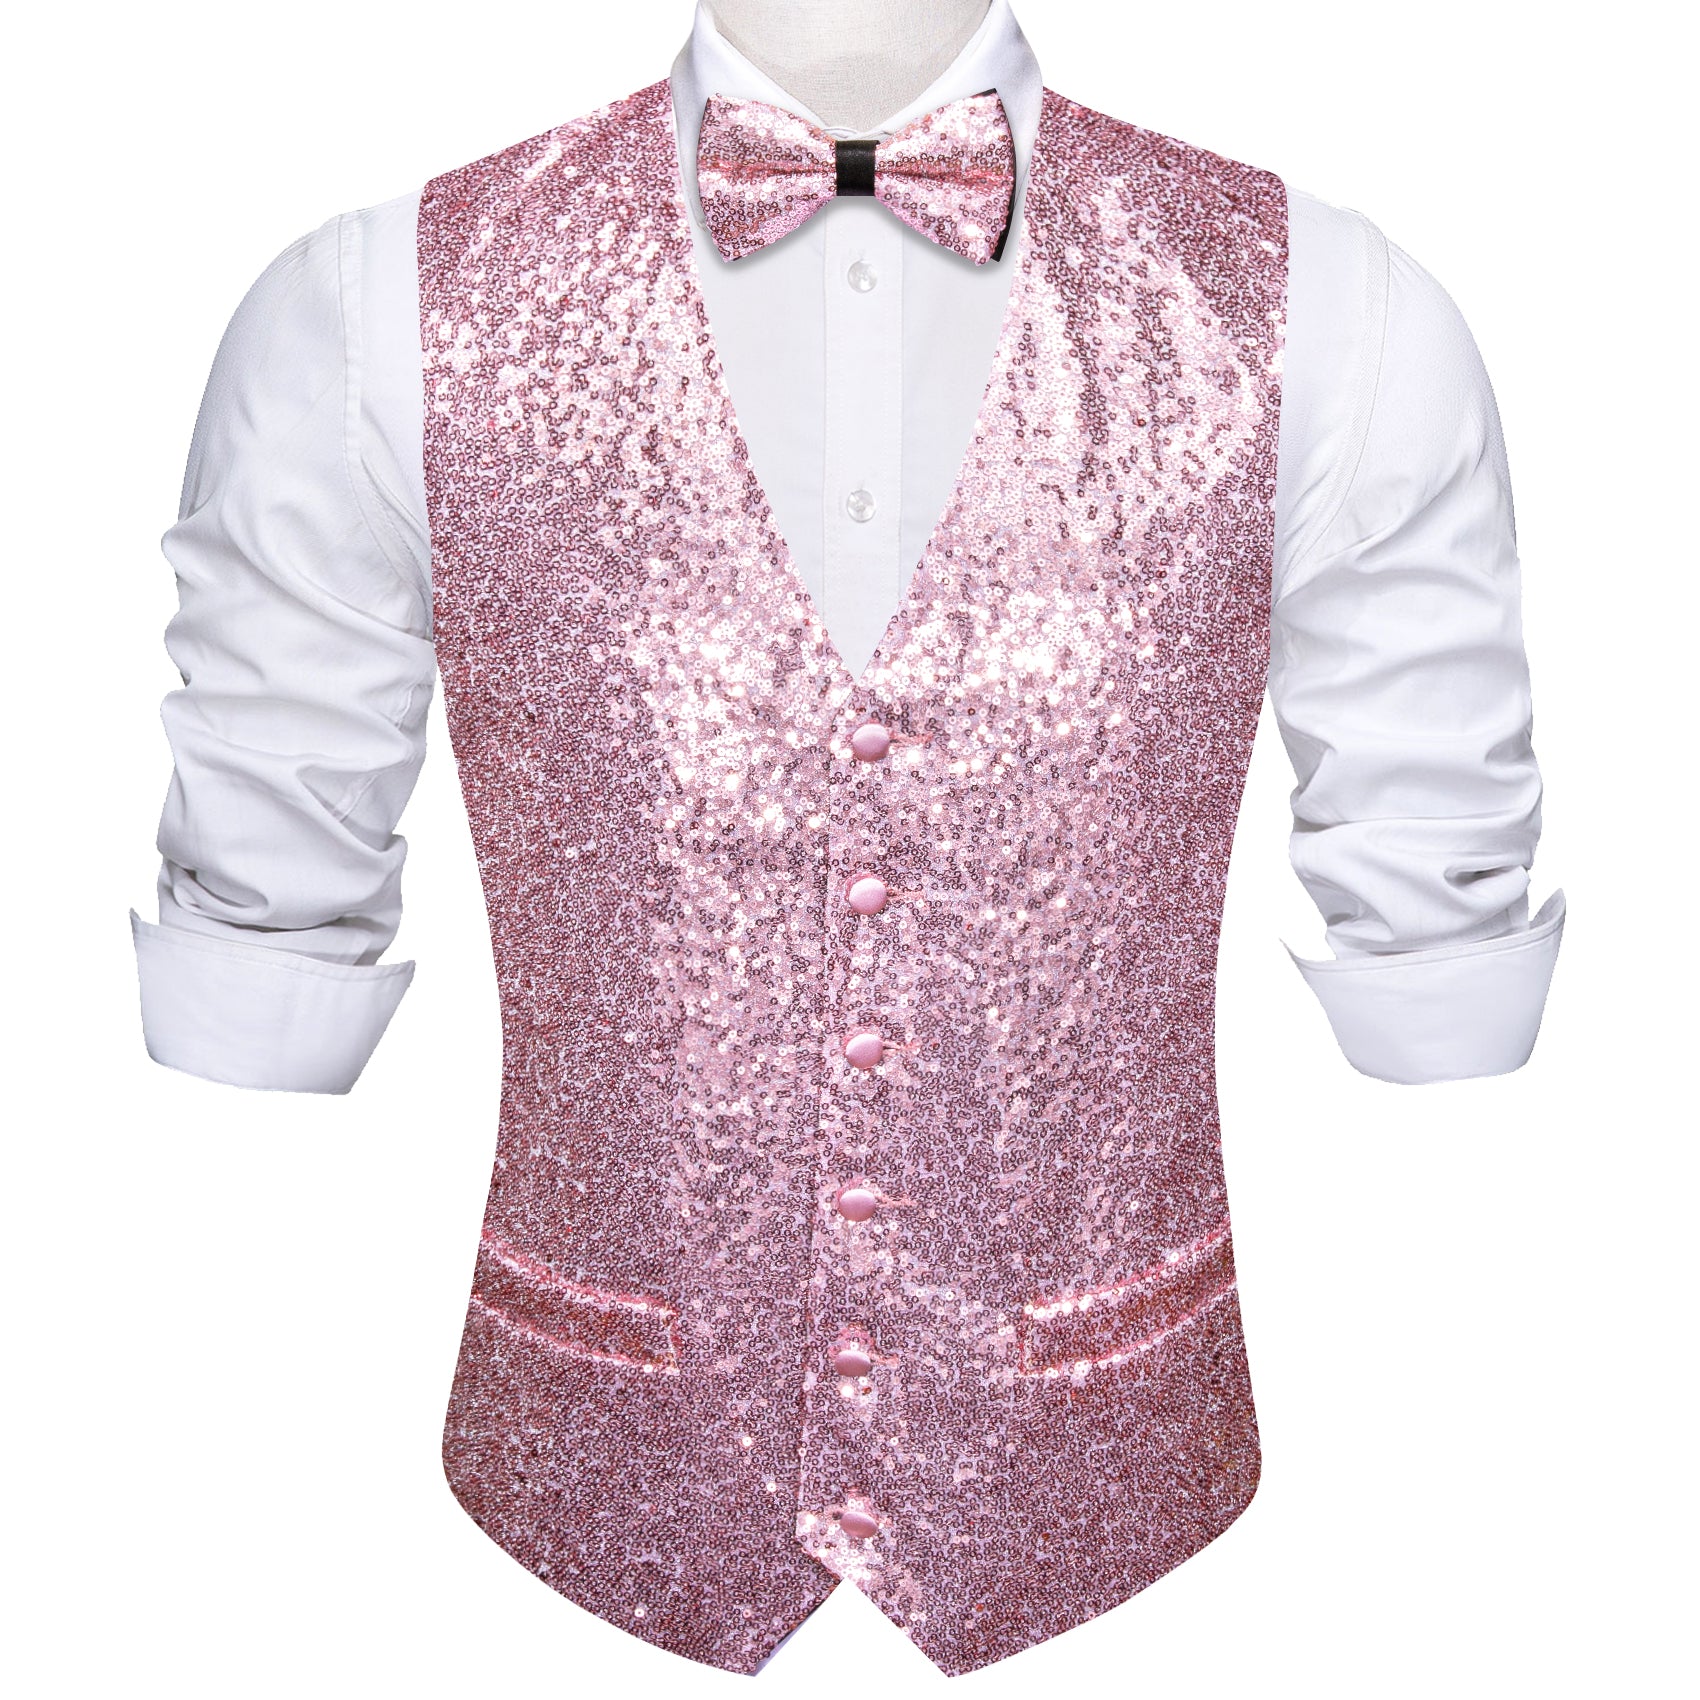 Barry.wang Men's Vest Pink Shining Bow tie Waistcoat Vest Set for Party